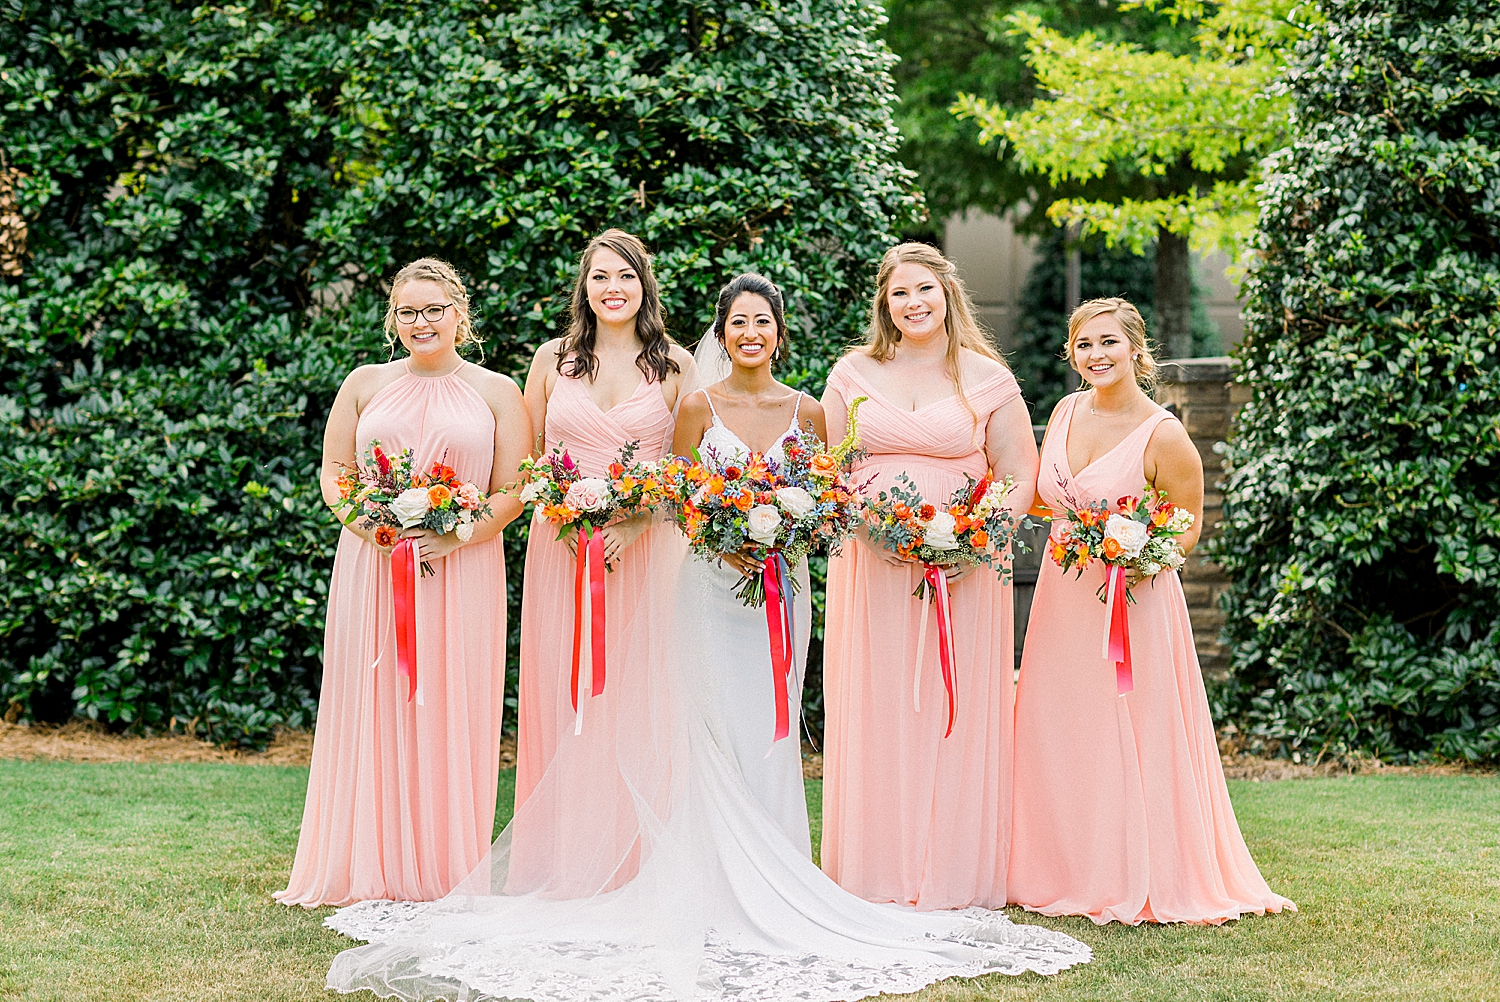 bride poses with bridesmaids in pink dresses